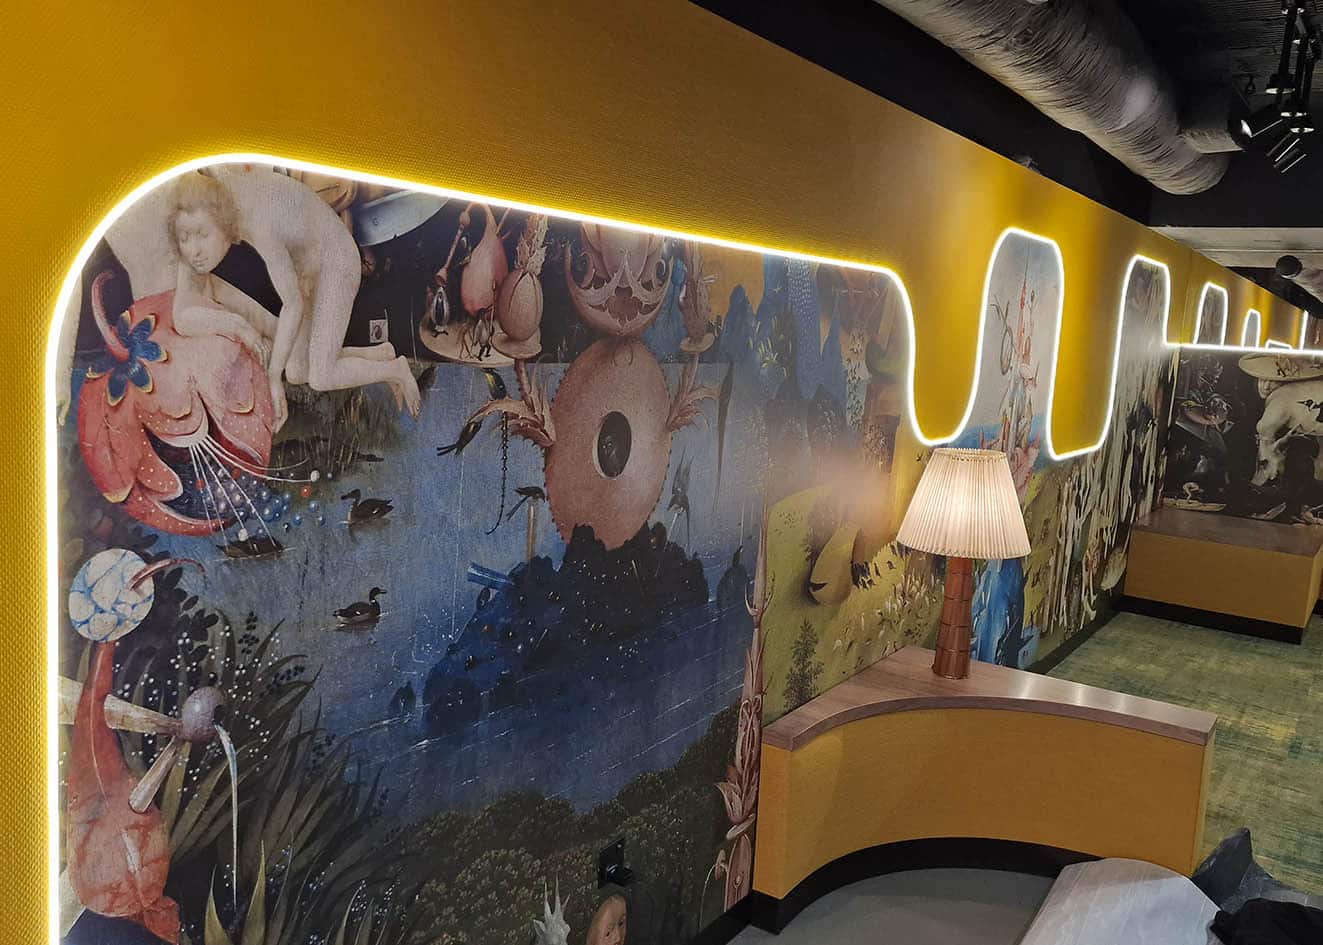 Made to measure wall mural installation by Bluespec Decorating Limited wallpaper hangers in a club in London. The mural is called “The Garden of Earthly Delights”. It is on curved part of a wall. The original painting is representing gate of heaven and hell.